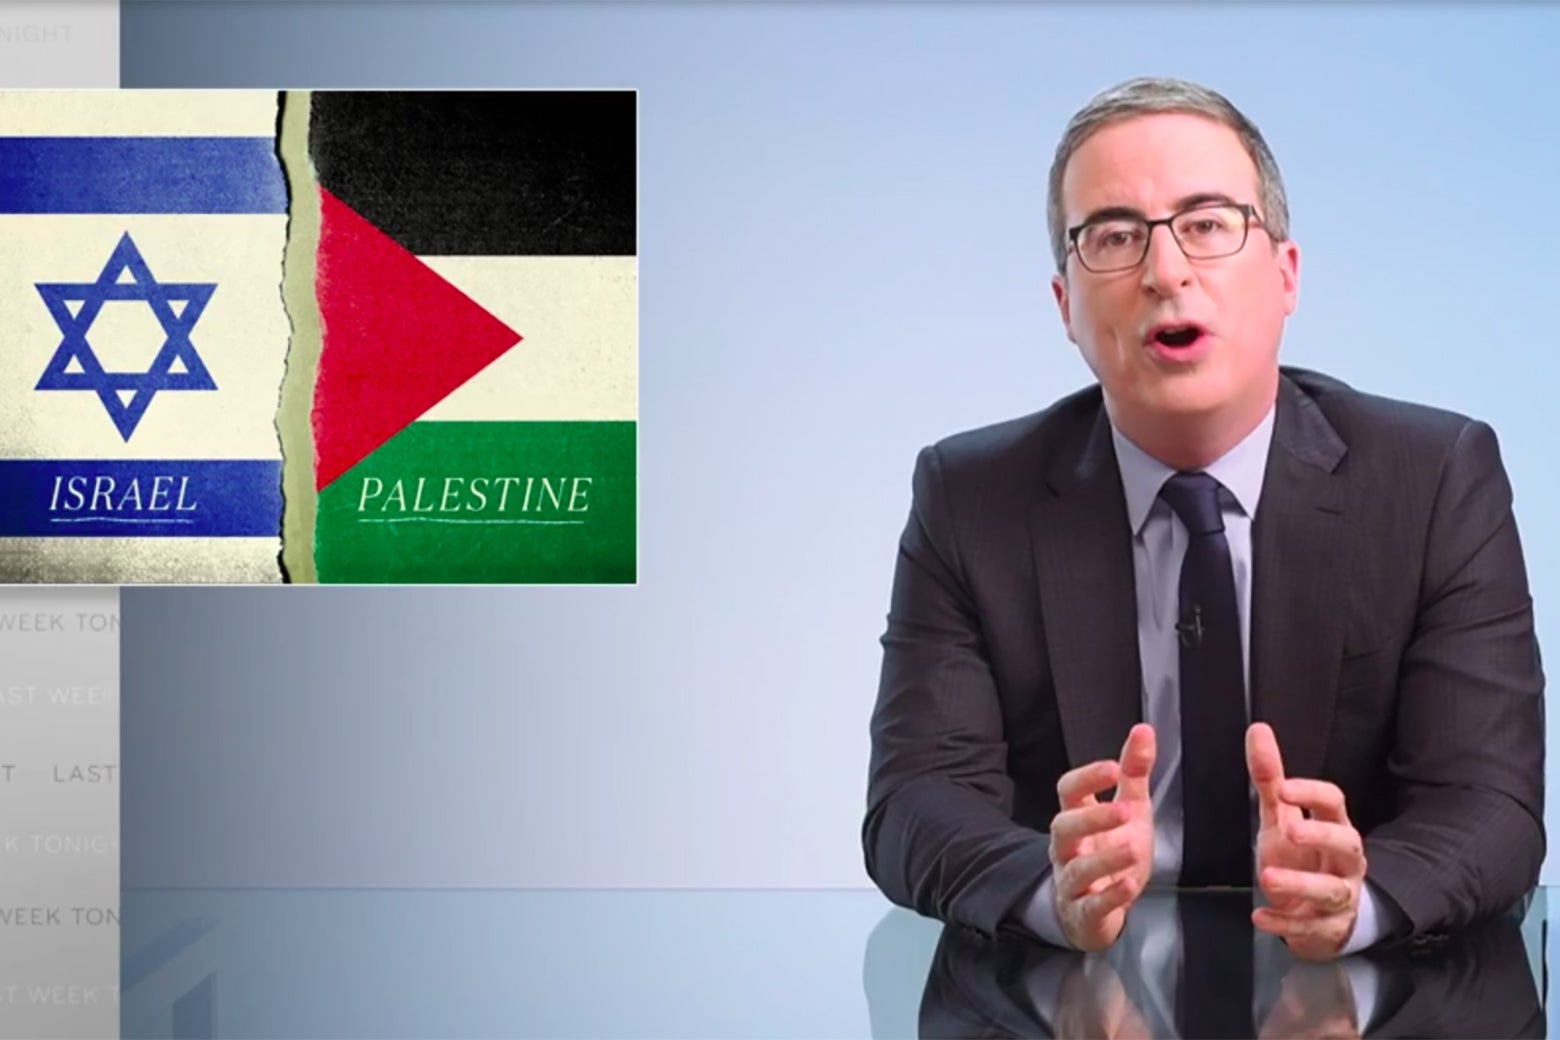 John Oliver sits at his glass anchorperson desk, in front of a graphic showing Israeli and Palestinian flags.